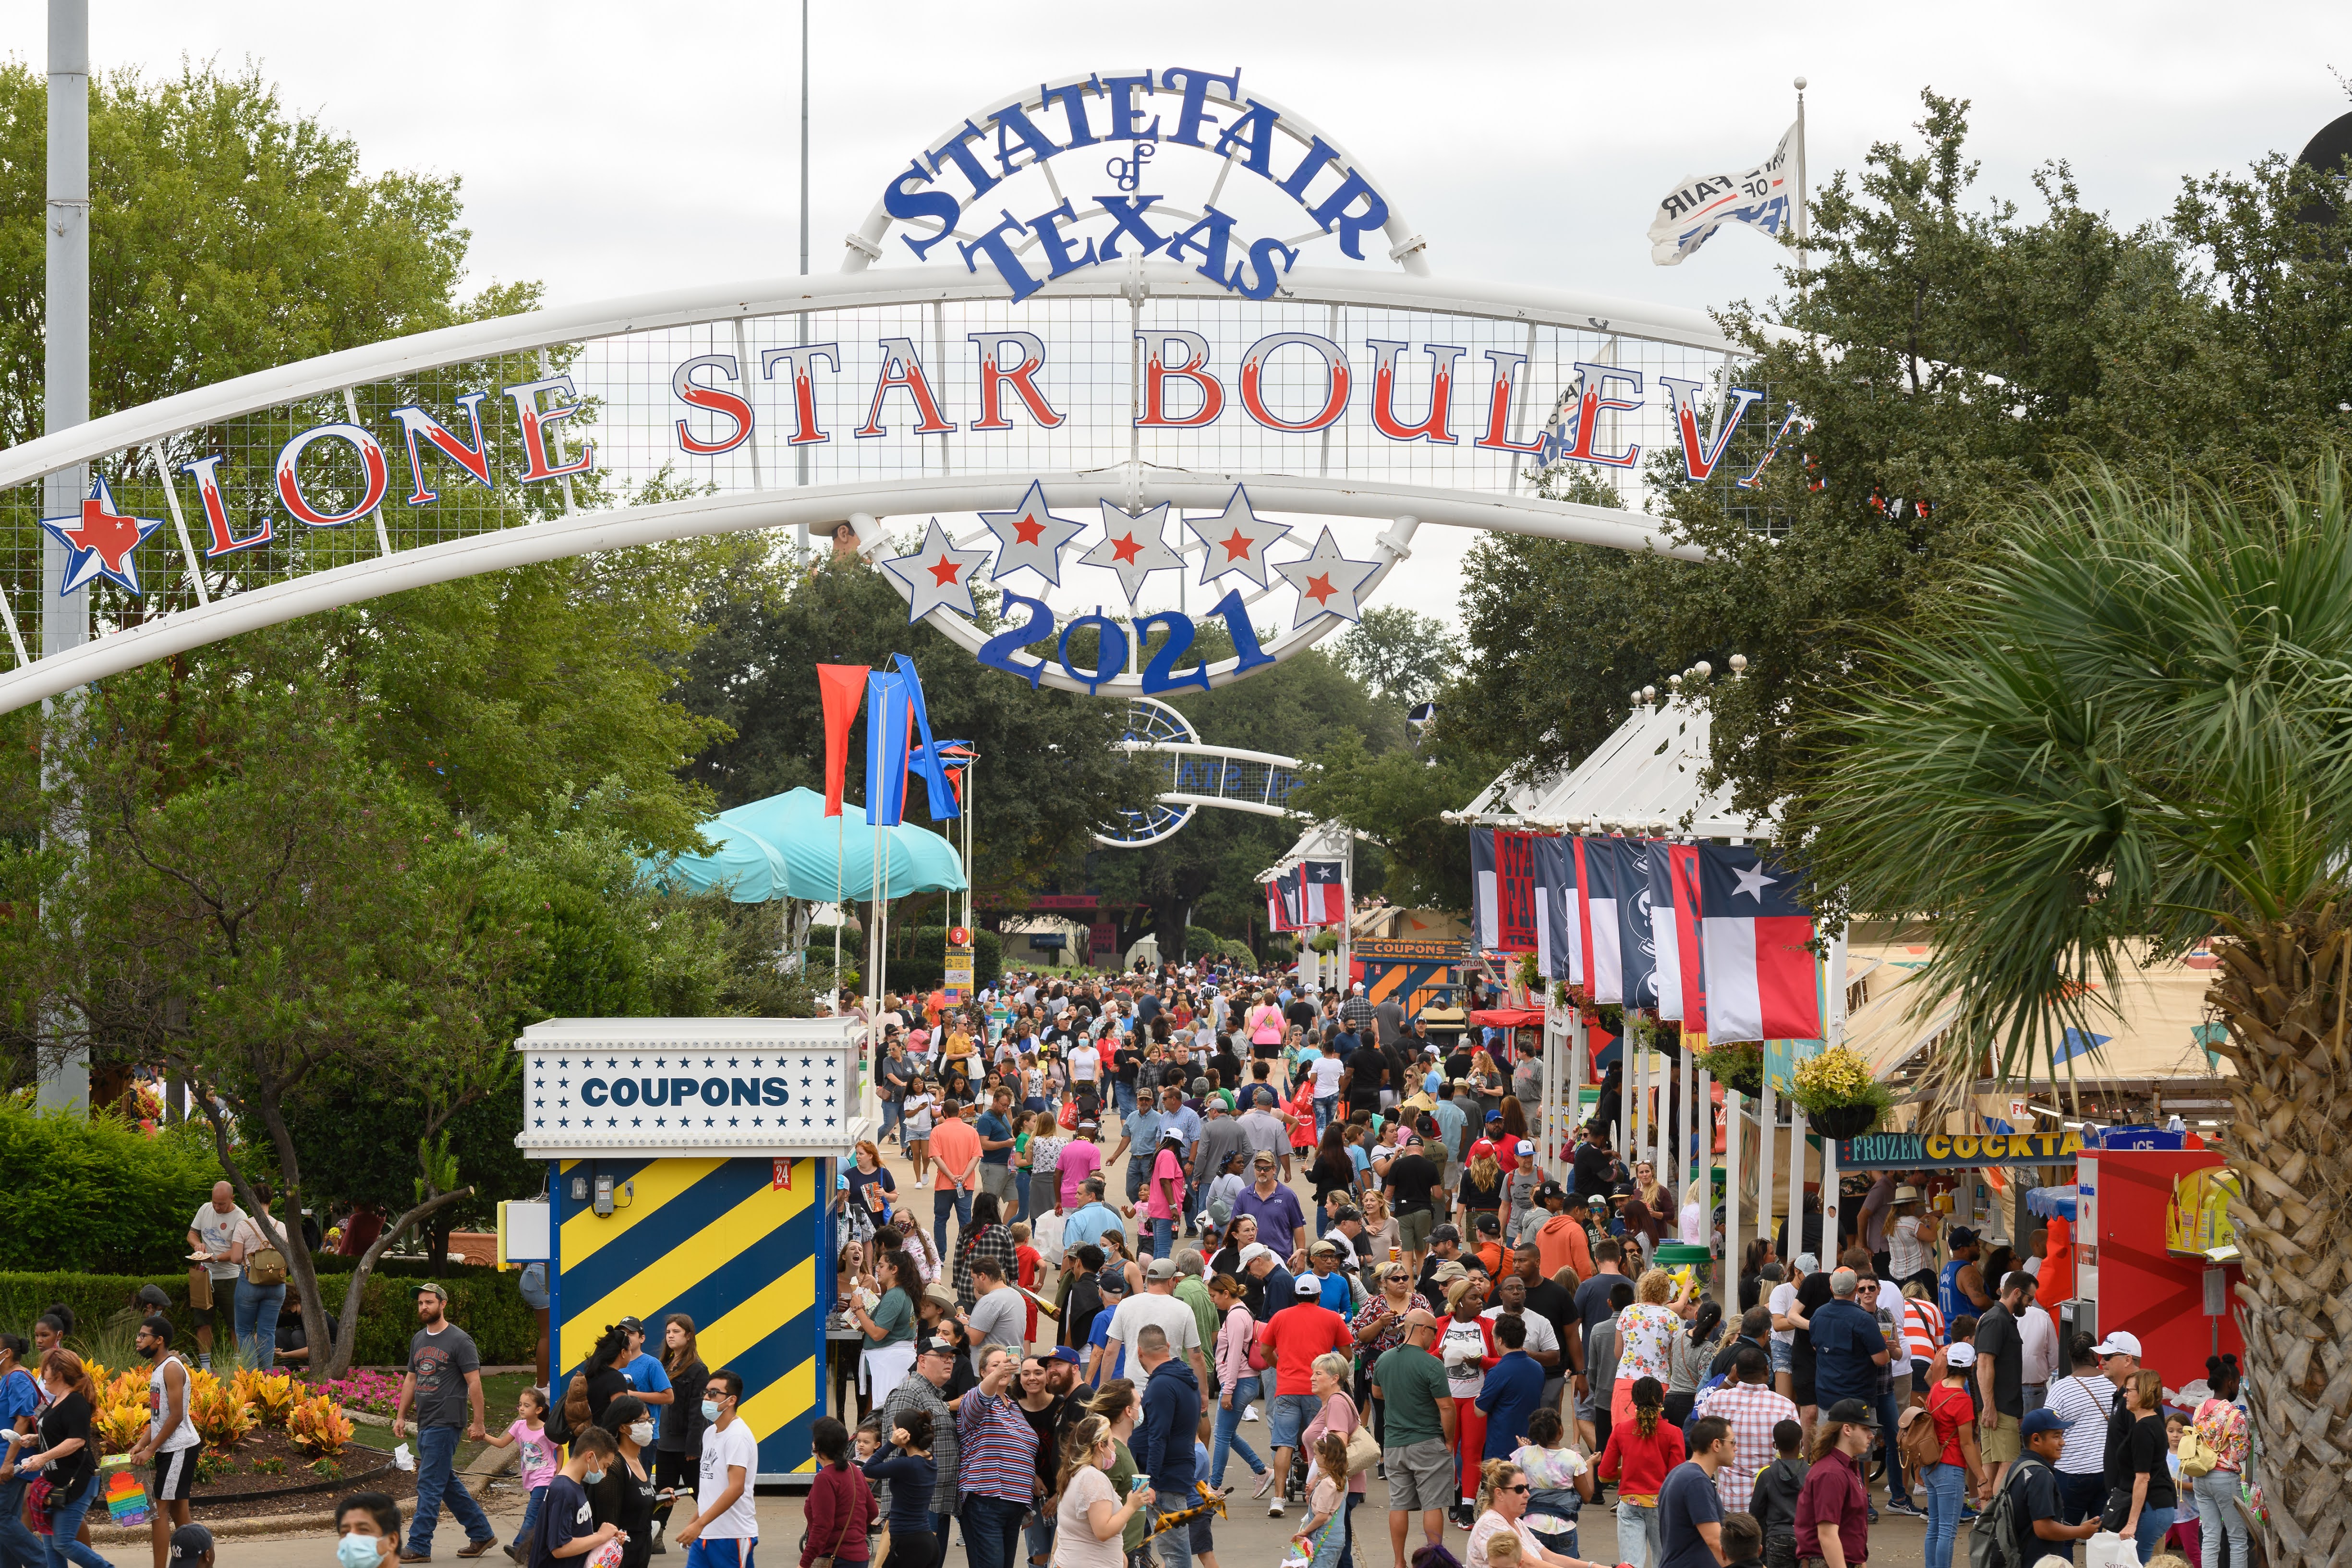 A parkway is full of people and each side is lined with food and ticket vendor booths. Above the scene, a metal overhang declares it, “State Fair of Texas, Lone Star Parkway.”